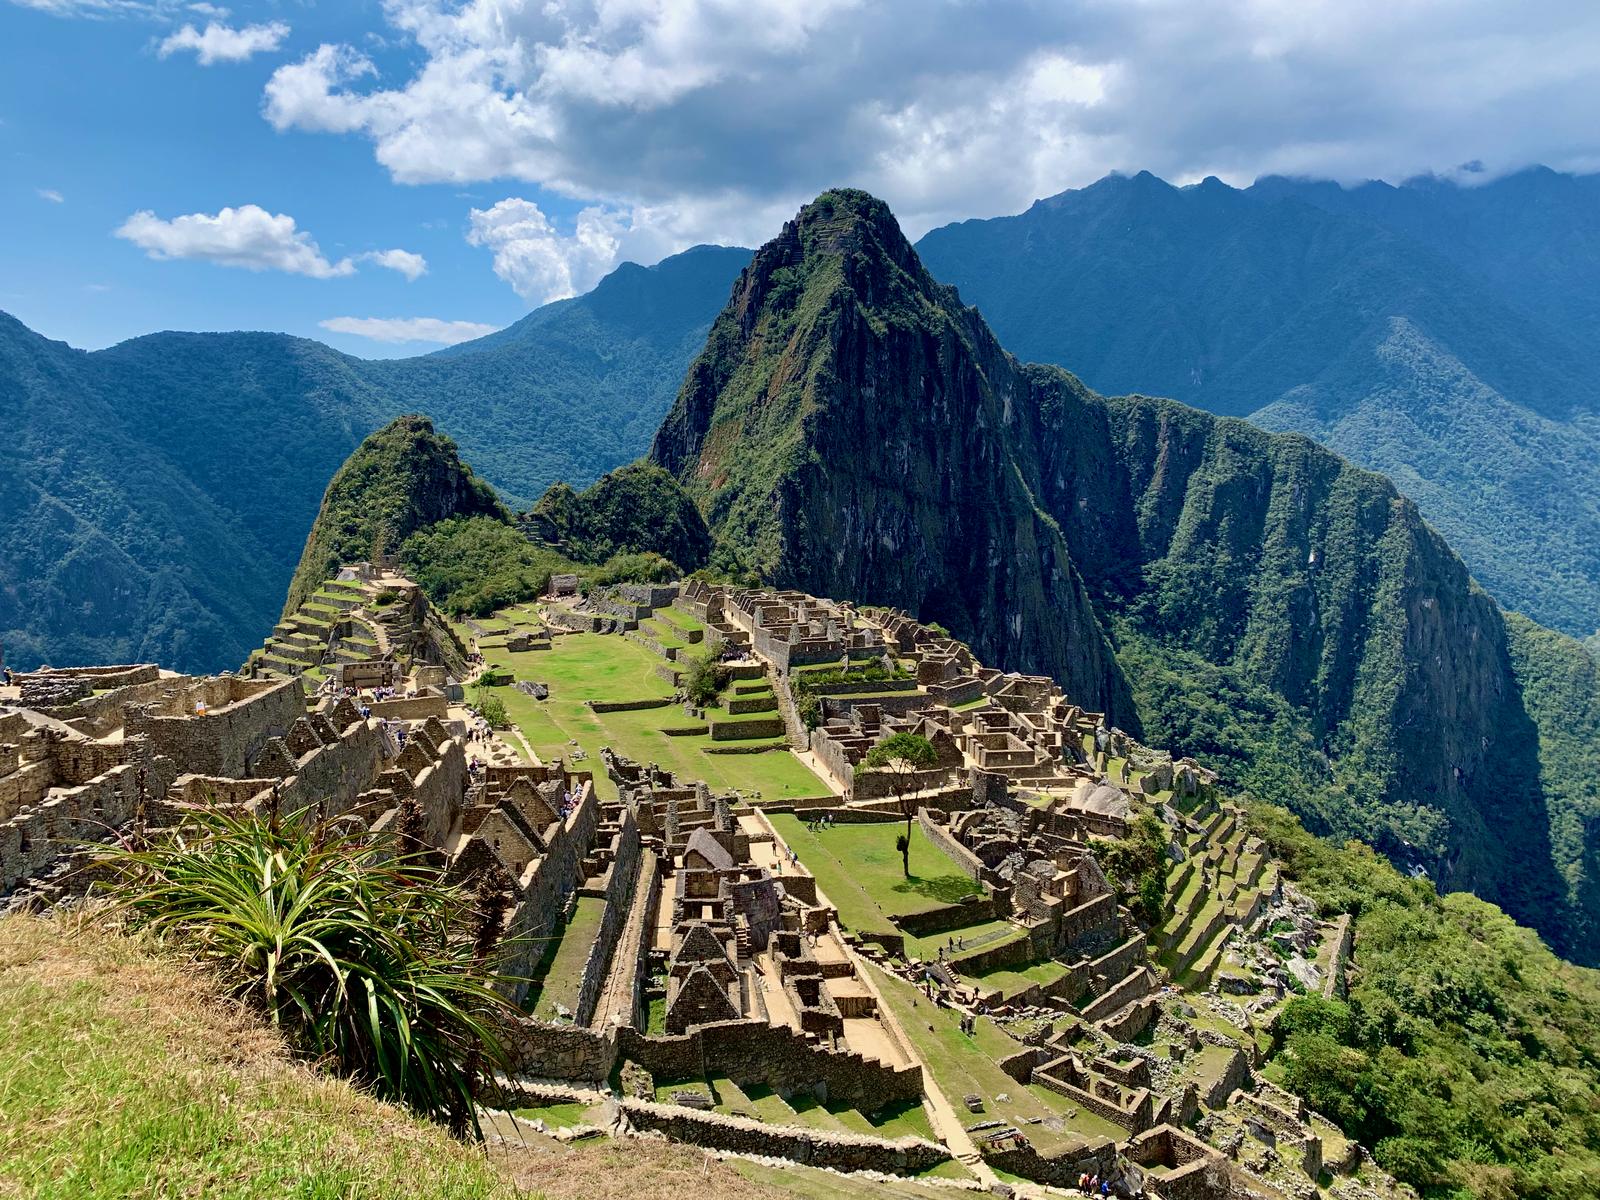 Can We Guess If You’re a Boomer, Gen X’er, Millennial or Gen Z’er Just Based on Your ✈️ Travel Preferences? Machu Picchu, Inca Empire civilization, Peru